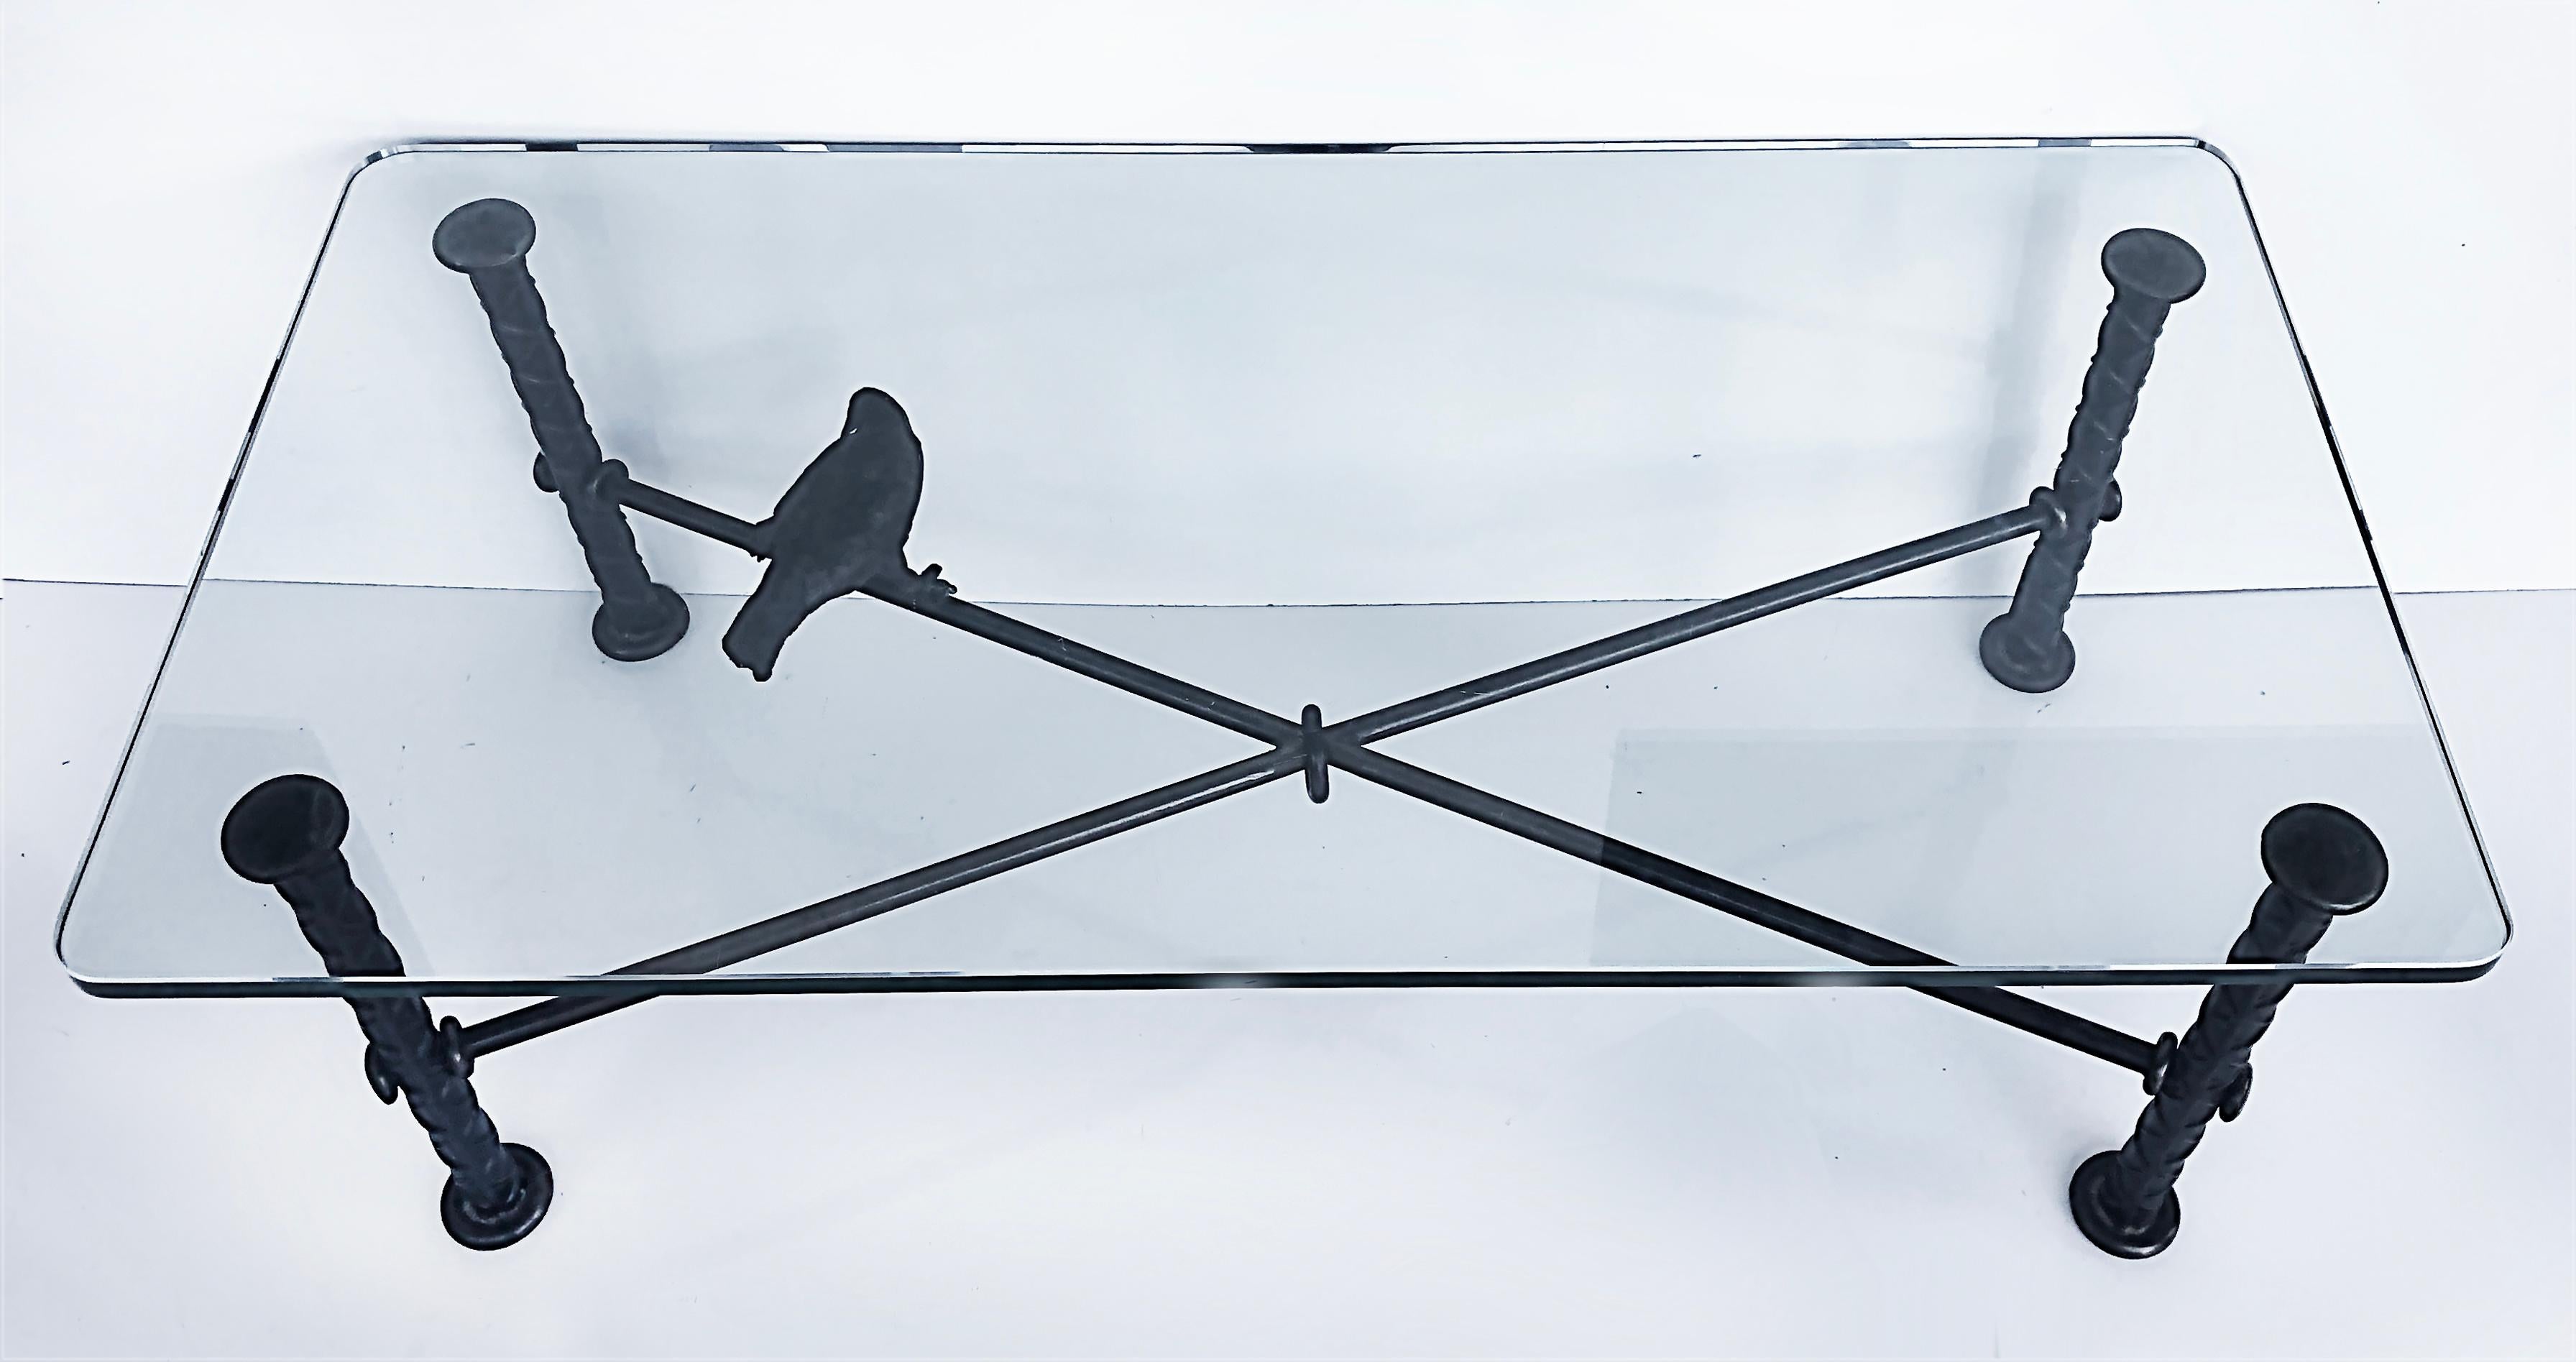 Metal Ilana Goor Brutalist Wrought Iron Bird Coffee Table, Signed and Numbered 39/100